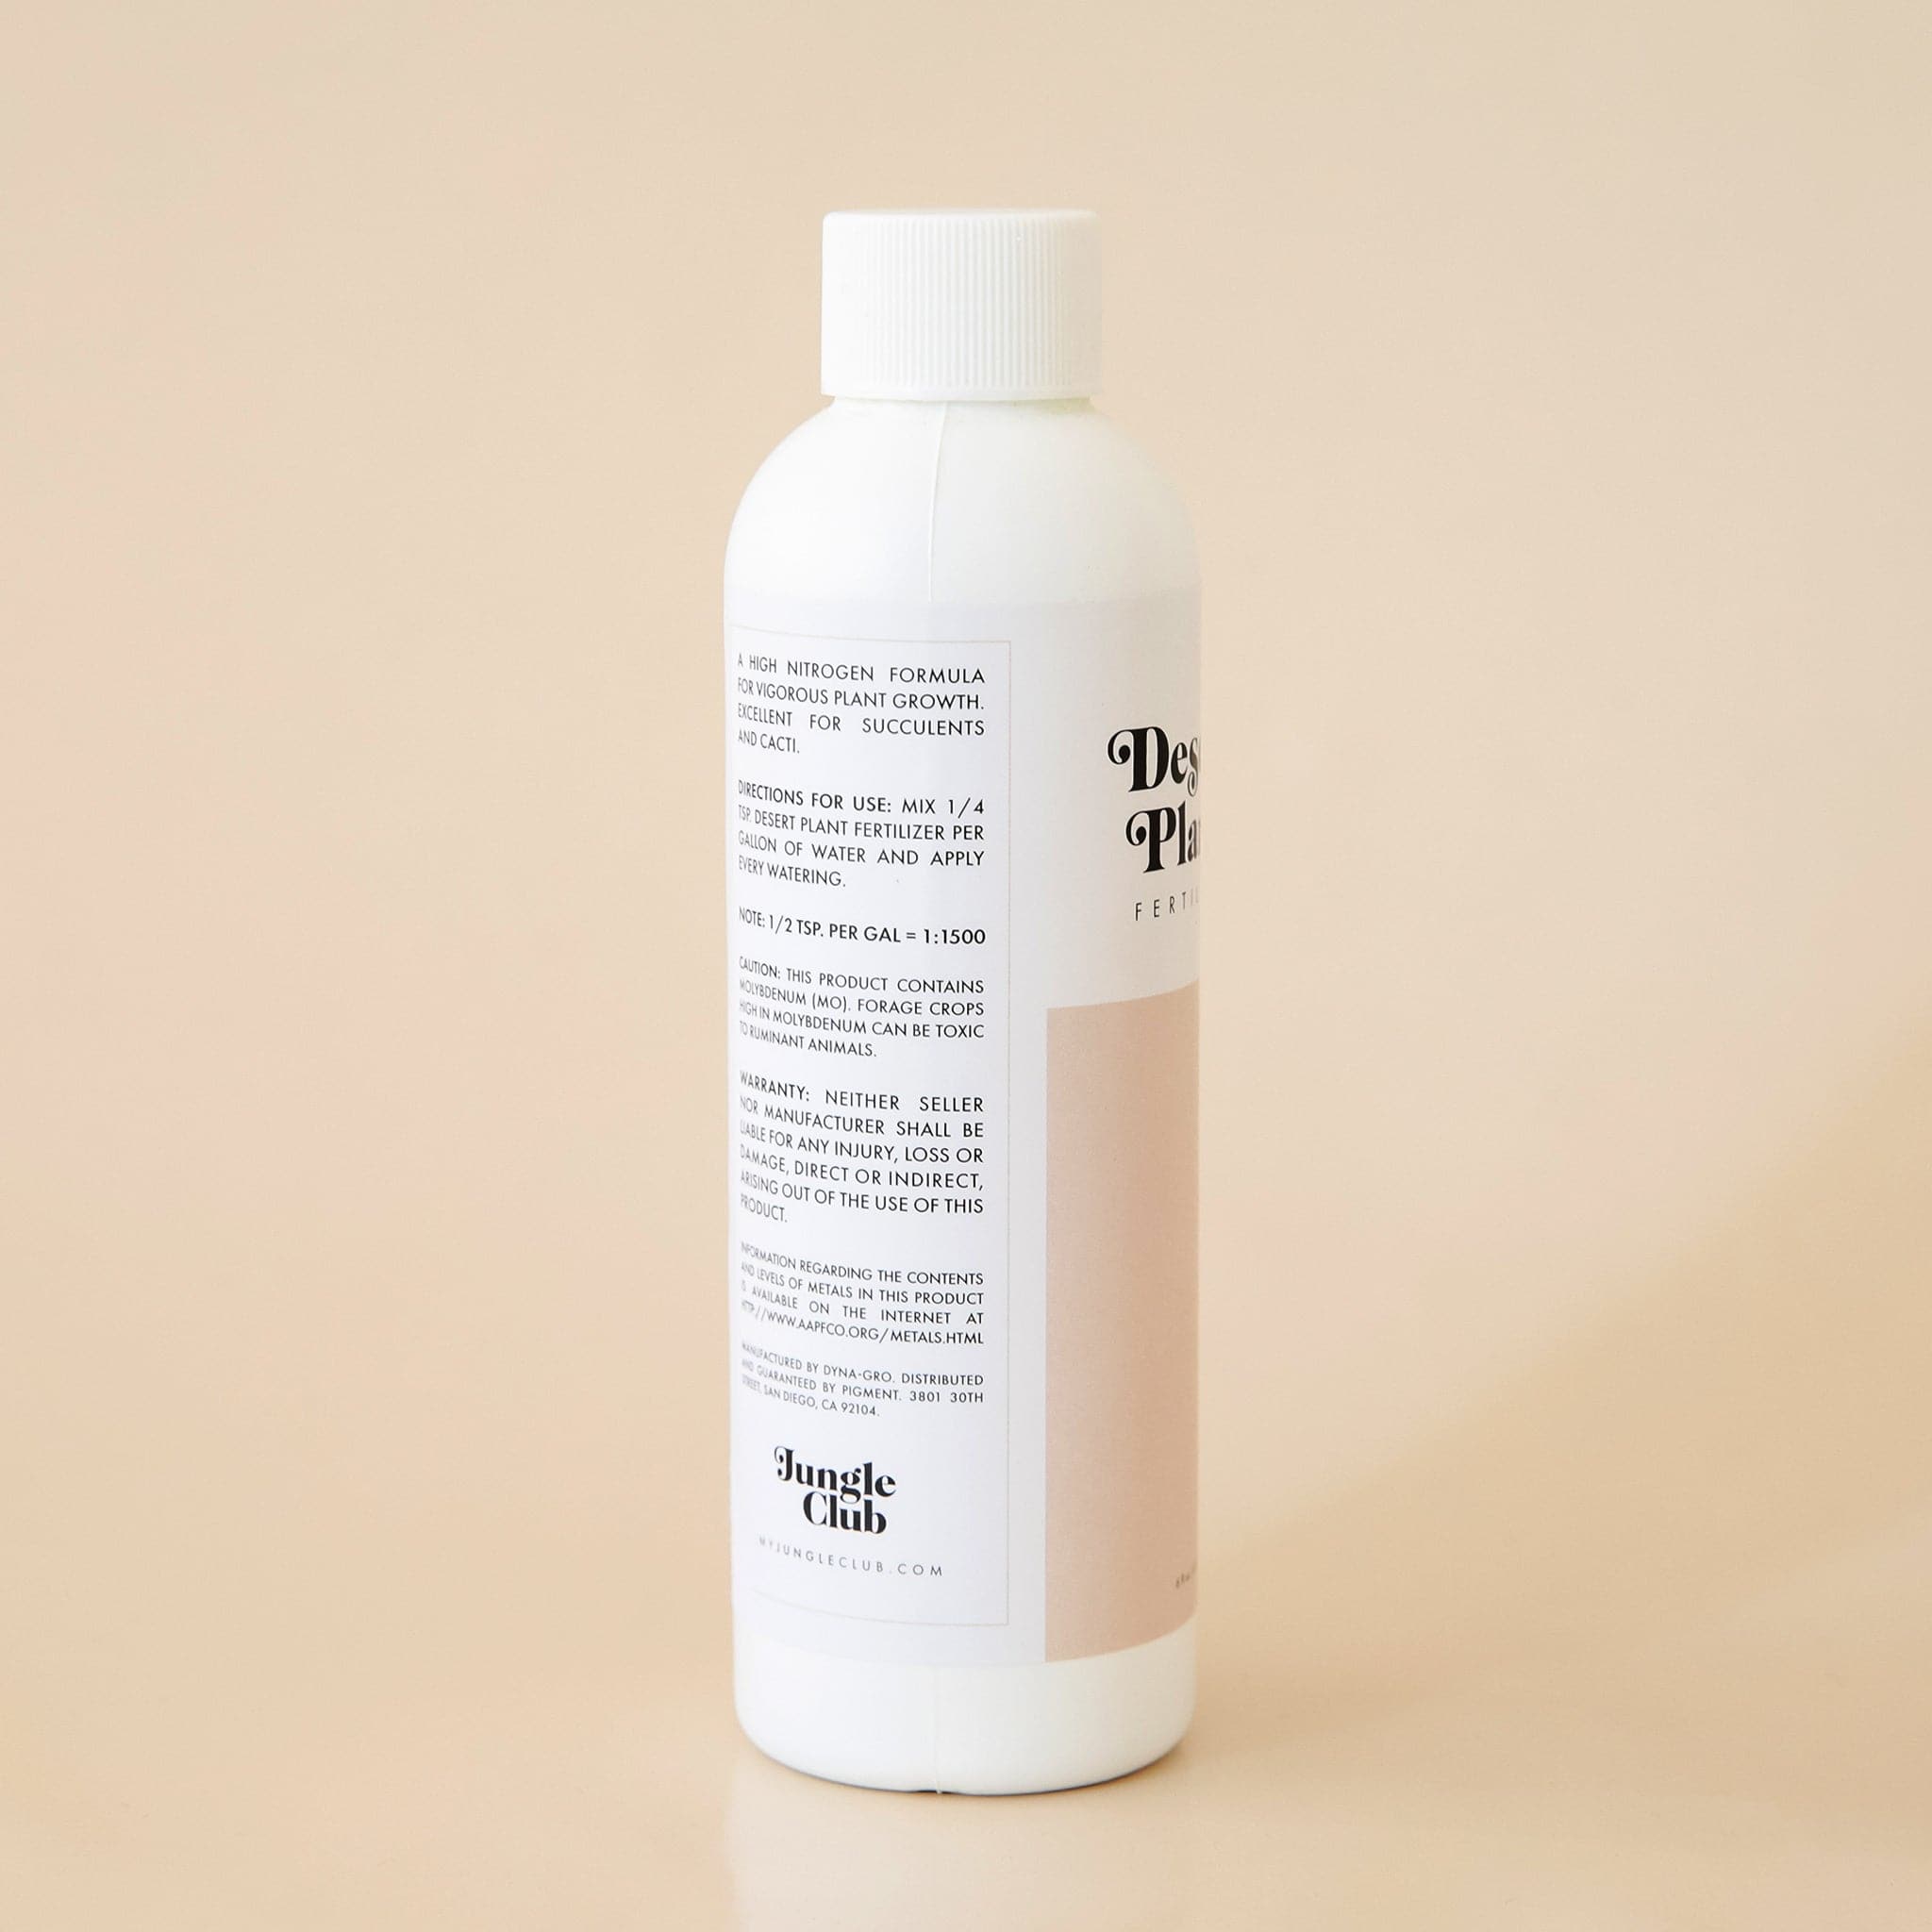 The wrap around label also includes a step-by-step directions sections and manufacture contact information. Similar to the ingredients lists, this section is outlined with a thin, soft beige border.  Below the directions is the company logo reading &#39;Jungle Club&#39; in black lettering. 